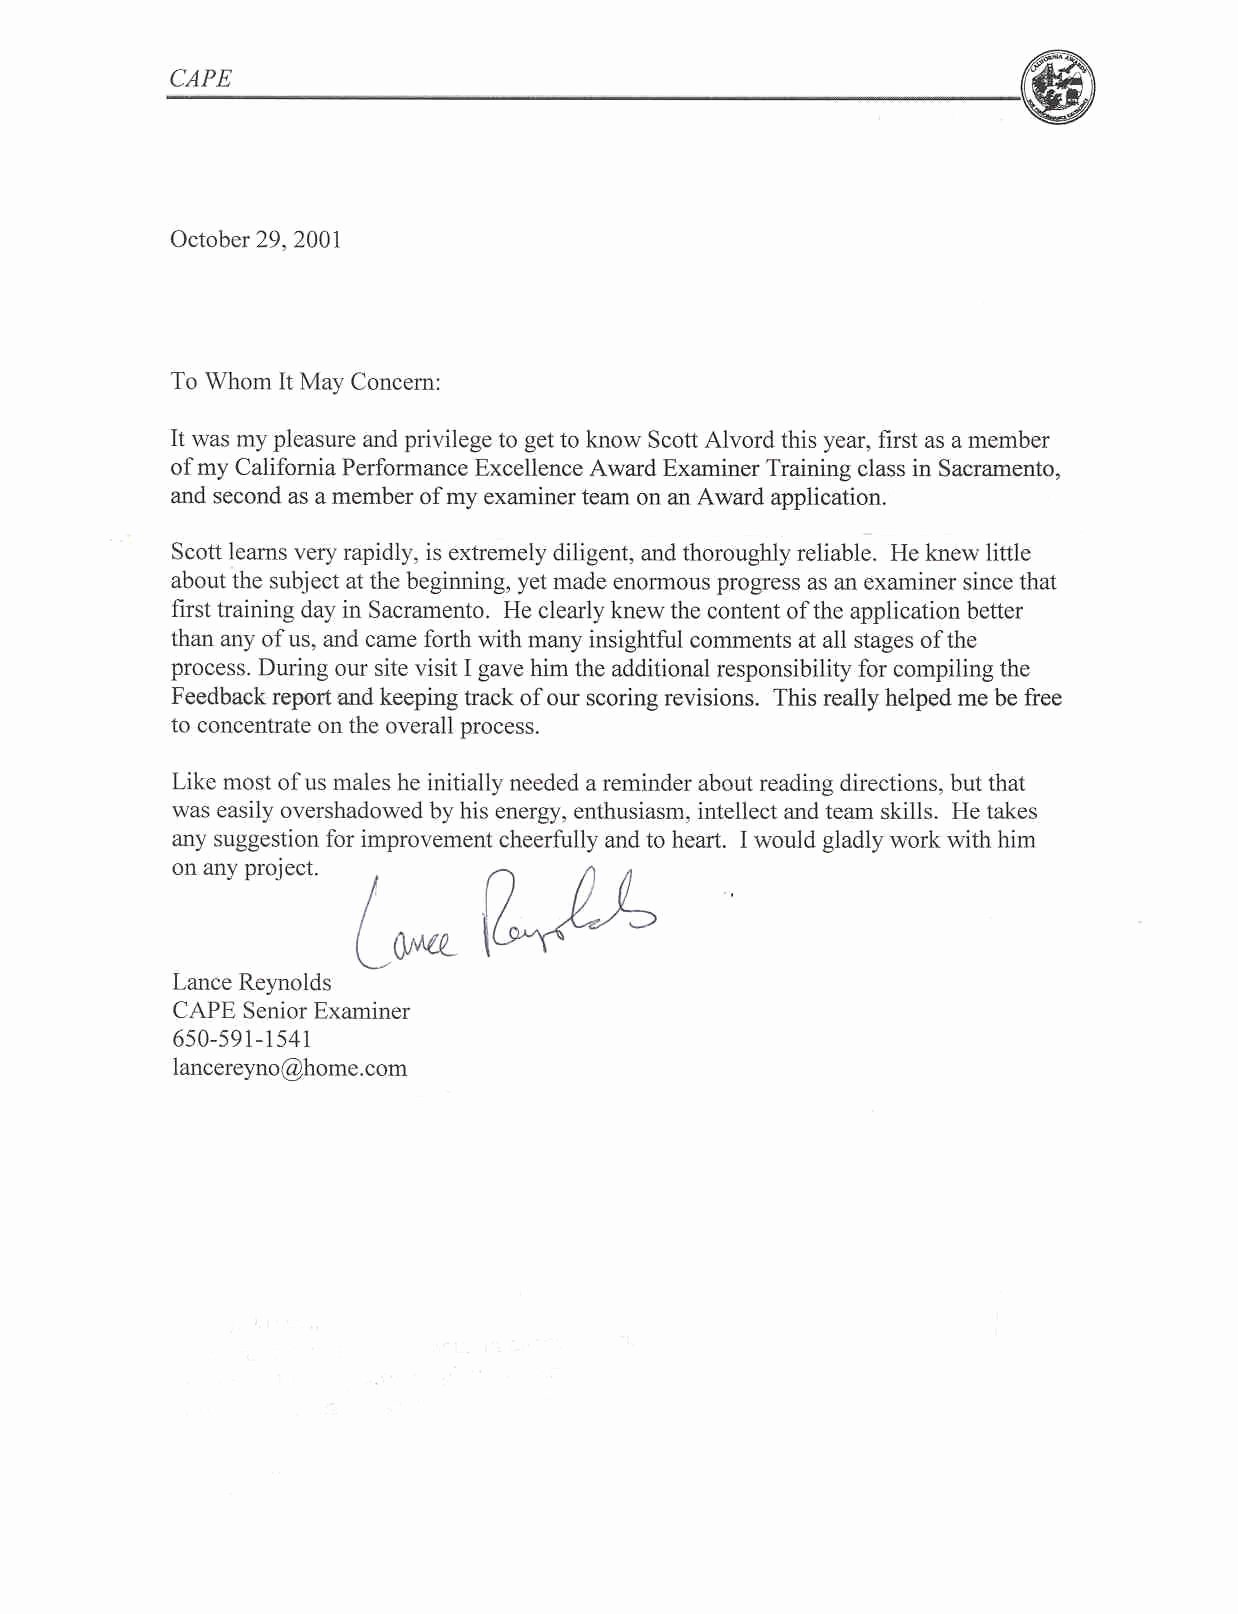 Letter Of Recommendation for Awards Beautiful Ideas Collection Letter Re Mendation for Award